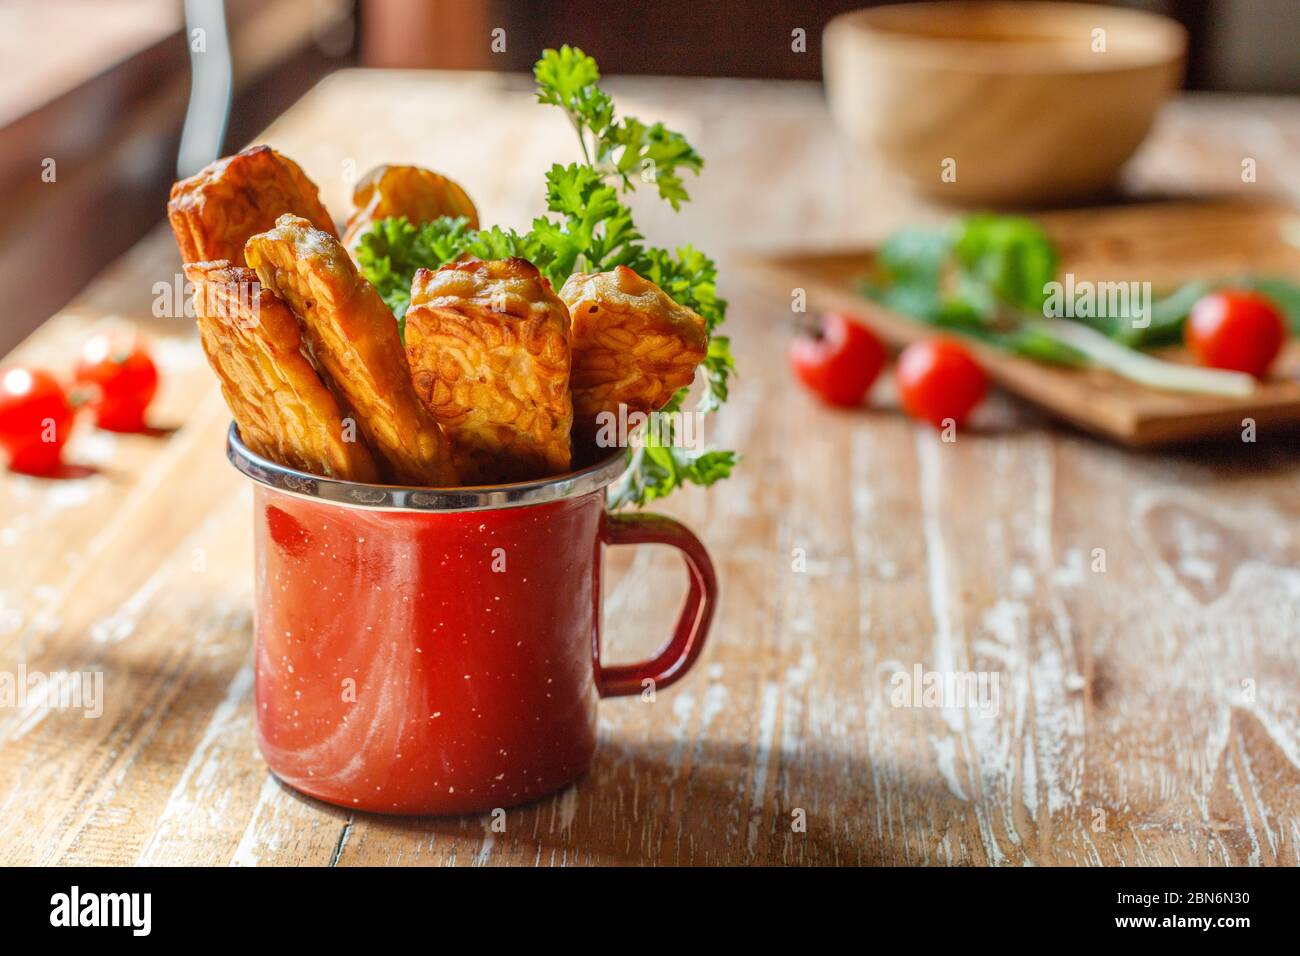 Red enameled cup with fried tempeh (traditional Indonesian soy product) on wooden surface. Side view. With space. Stock Photo